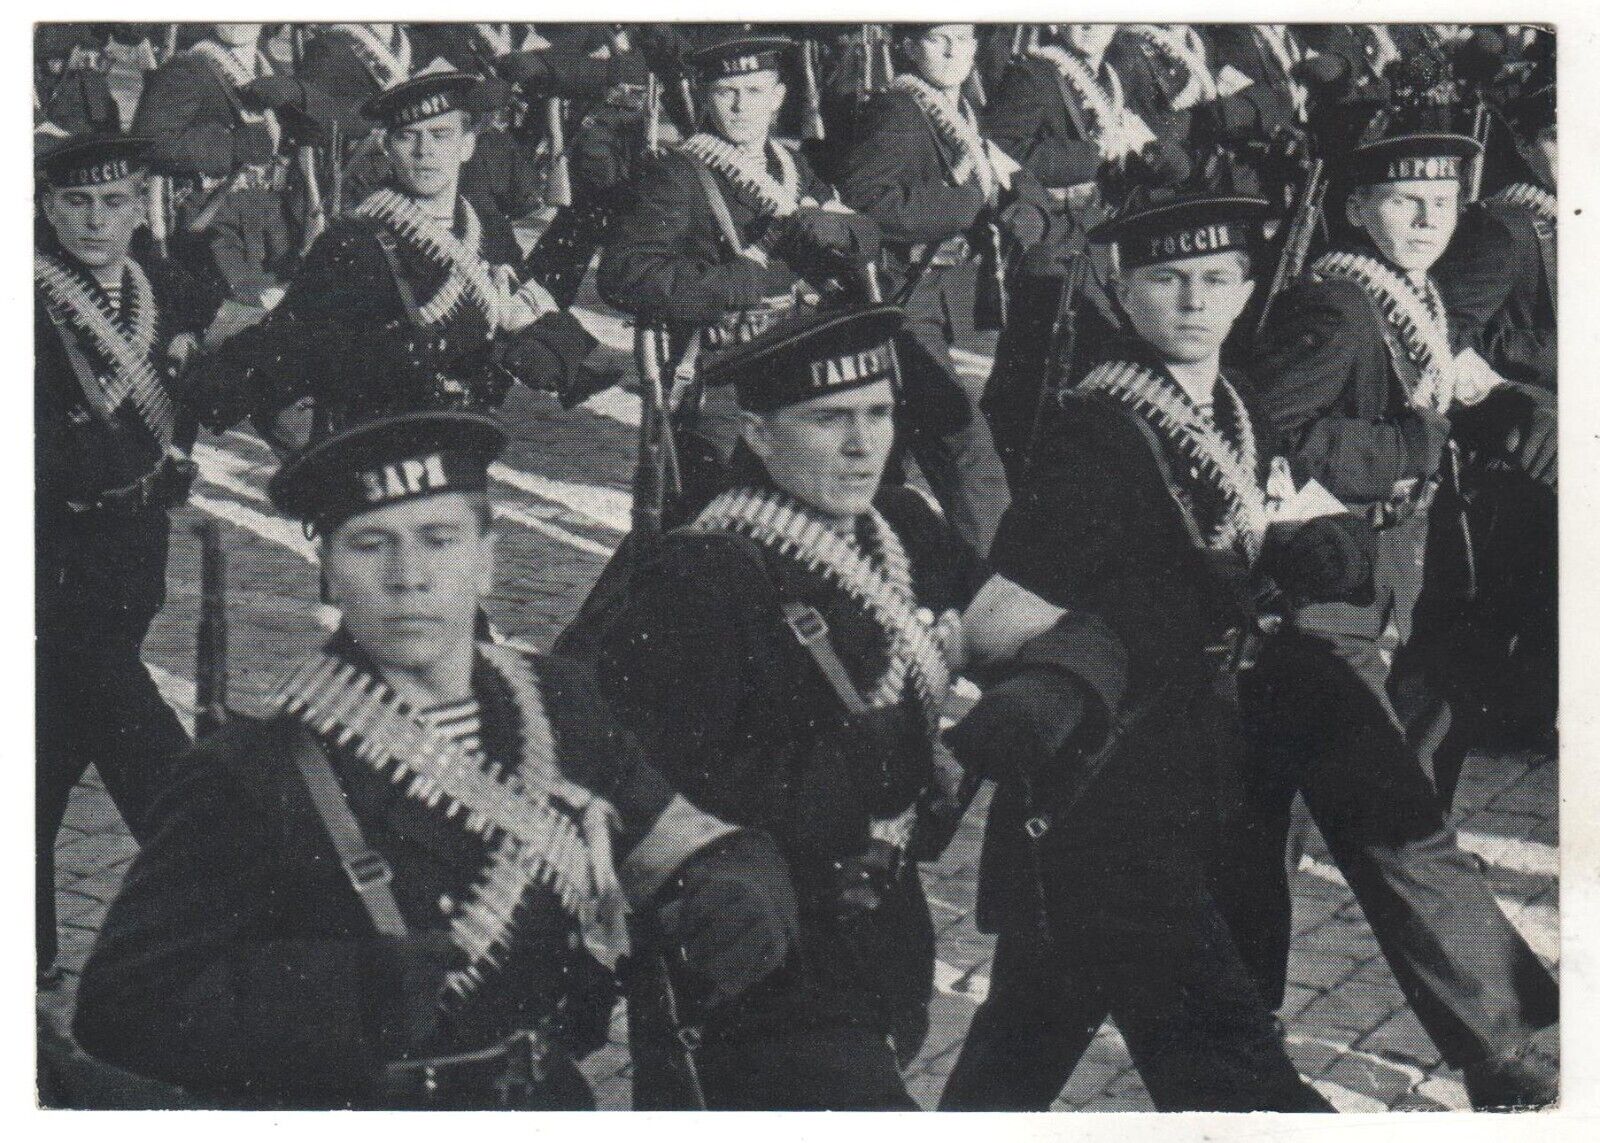 1967 SAILORS Parade in honor 50th ann. Great October OLD Soviet Russian Postcard